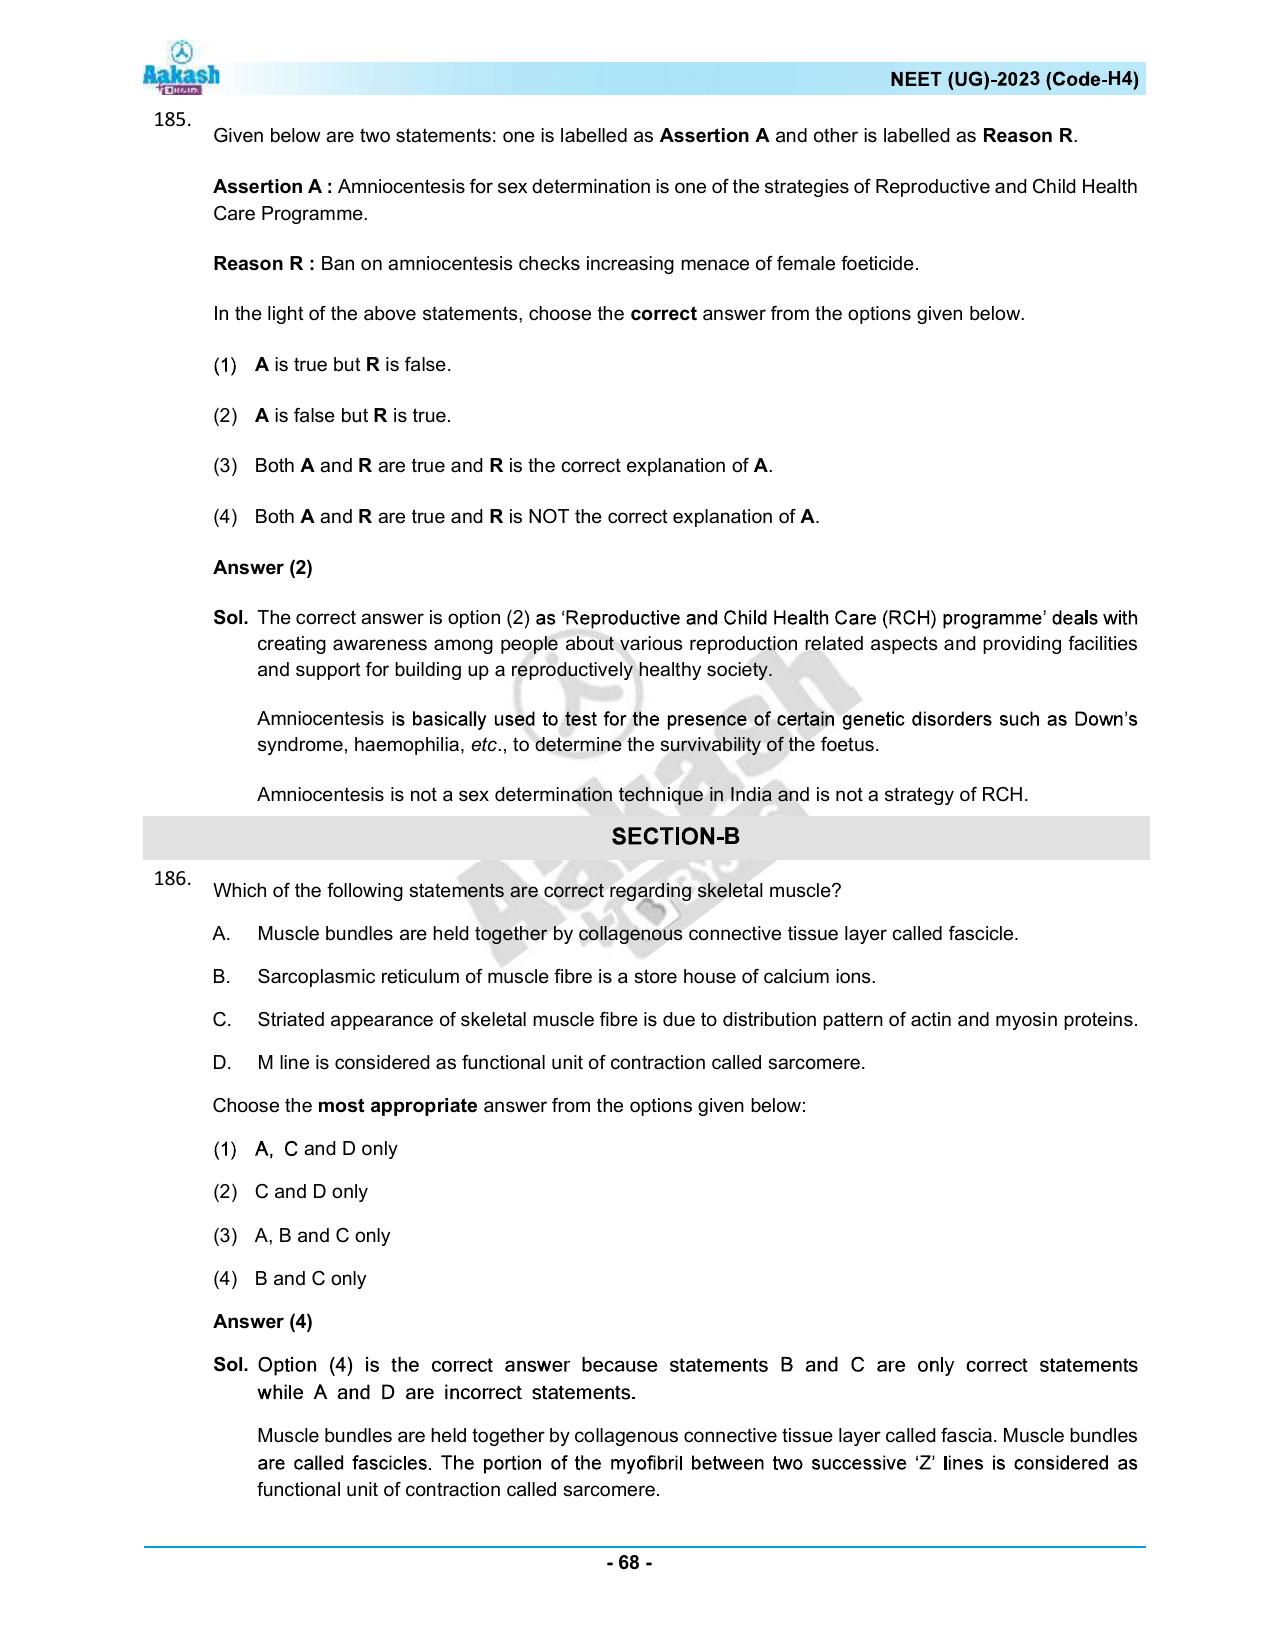 NEET 2023 Question Paper H4 - Page 68